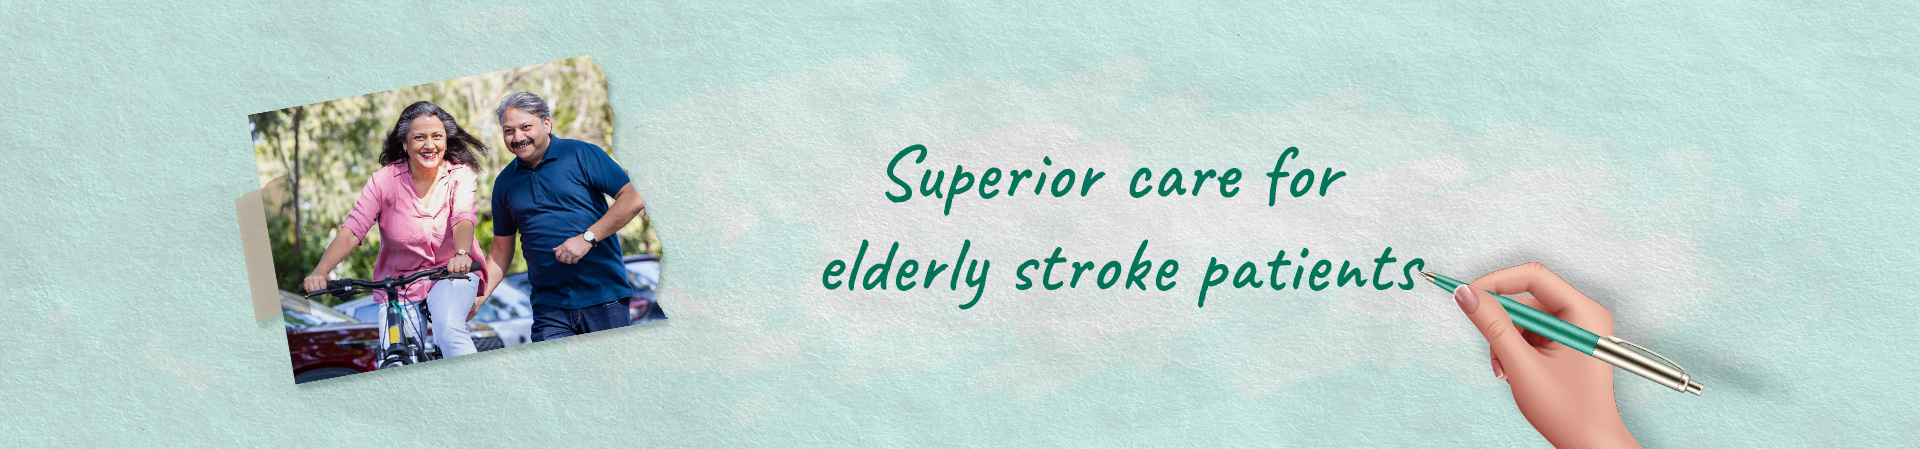 Elderly Care Services for Stroke Patients at Home in Kolkata: A Complete Guide